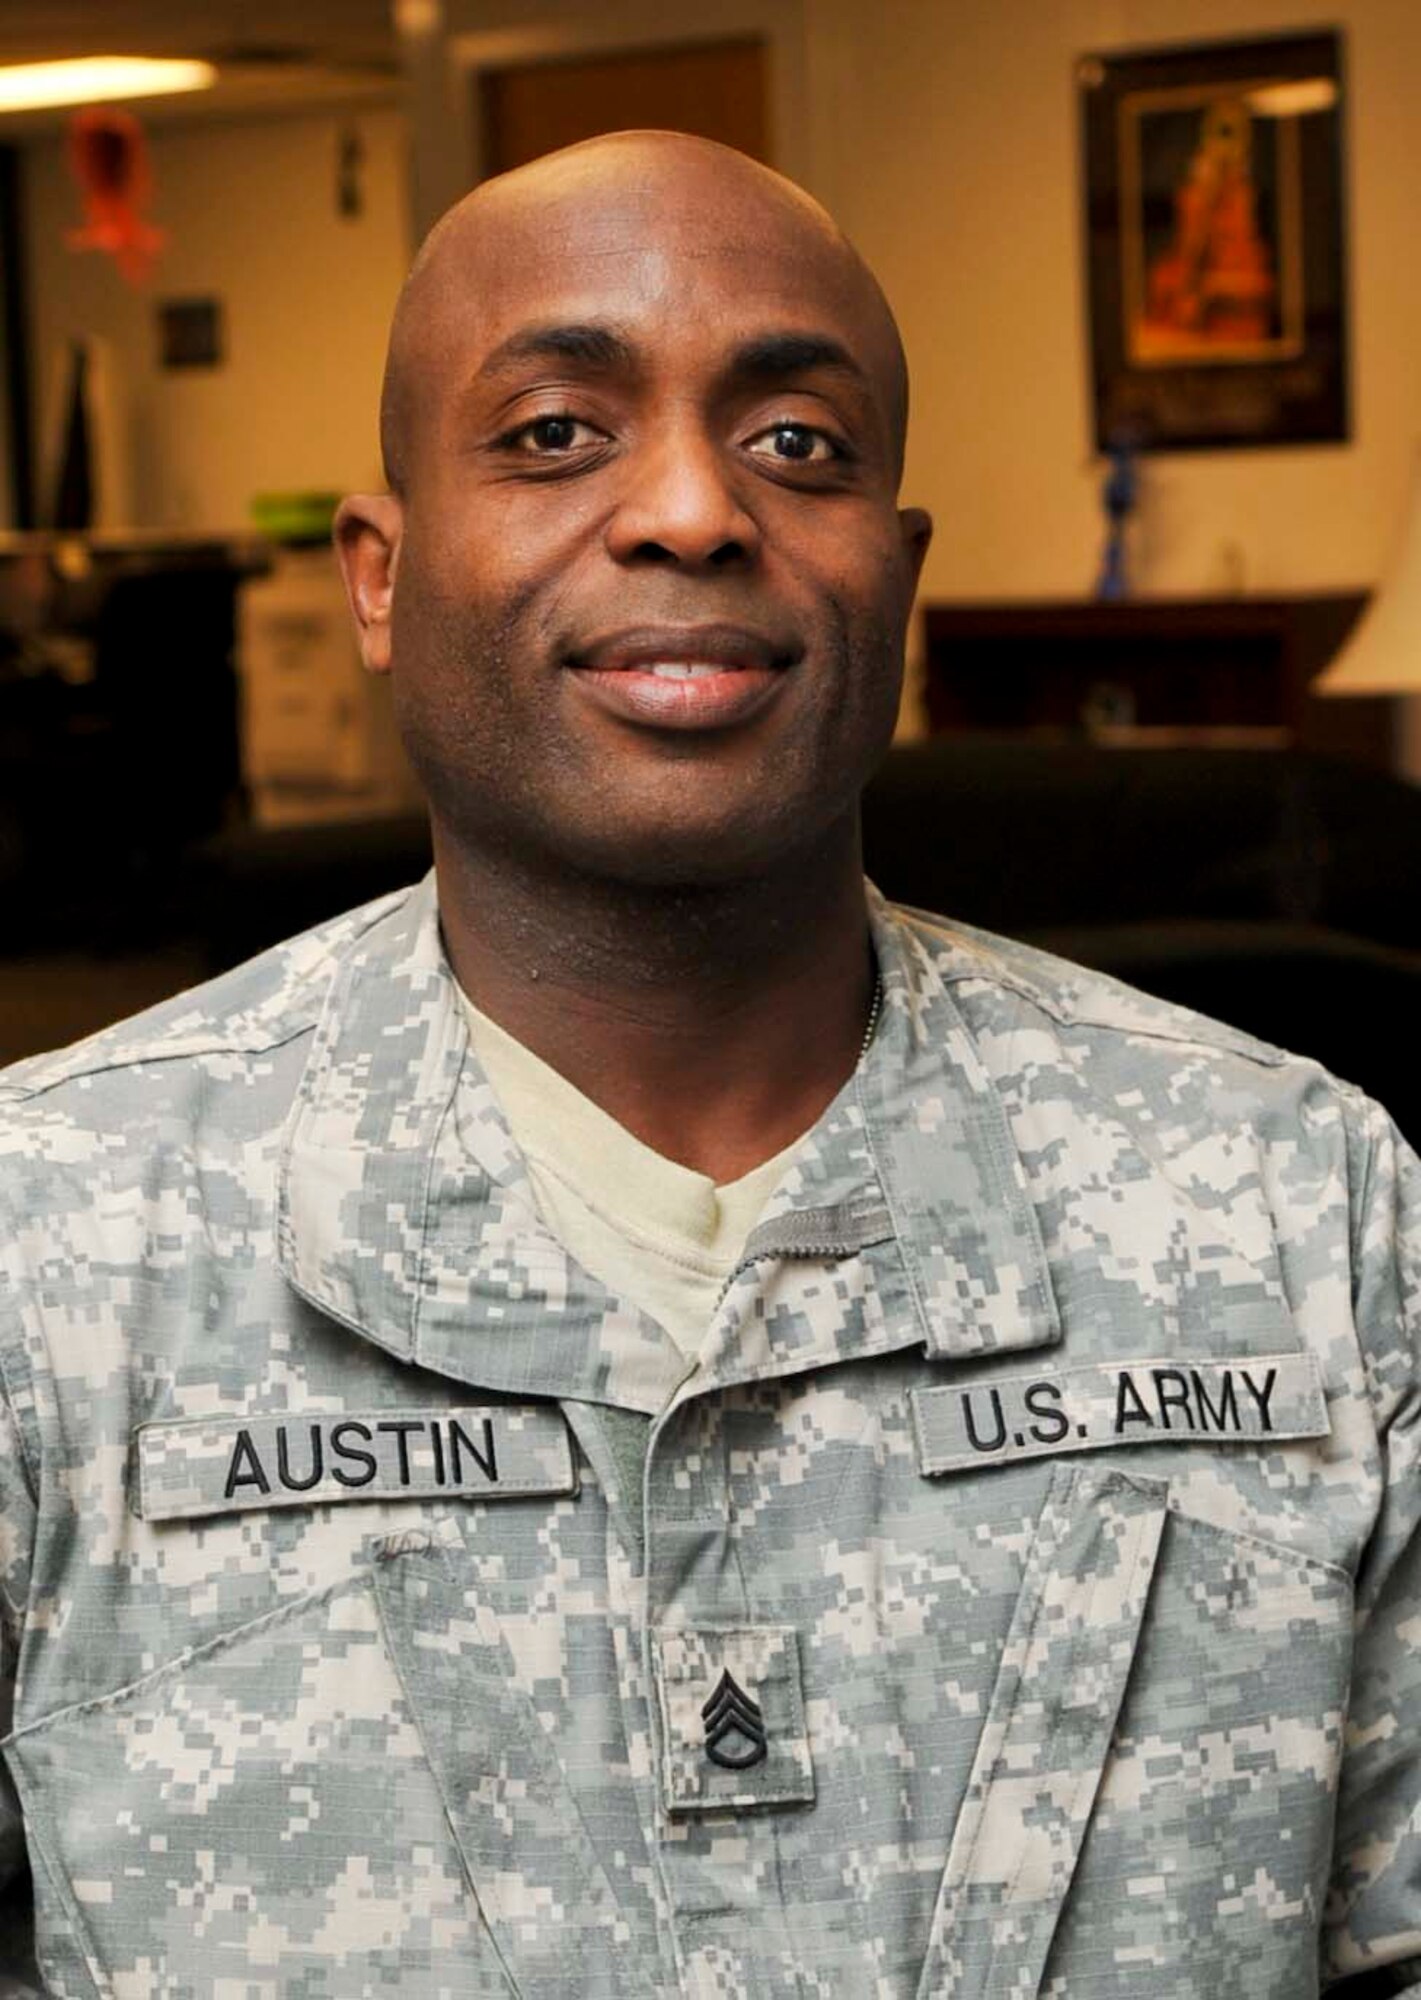 “I always double check my grammar, punctuation and spelling before sending an email.”
Staff Sgt. Michael Austin
Warrior Transition Unit   A. Co.
